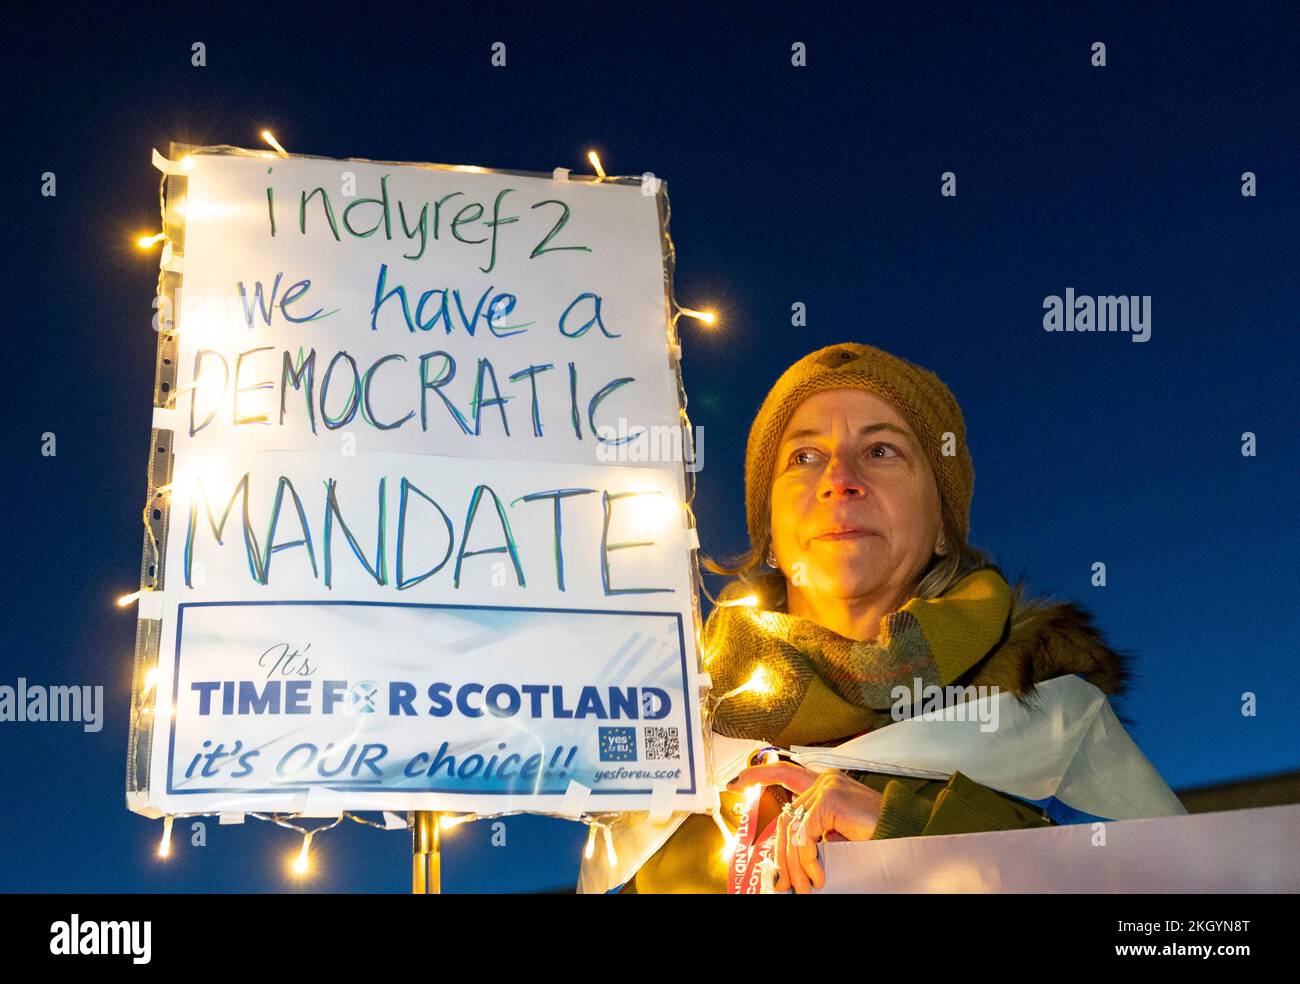 Edinburgh, Scotland, UK. 23rd November 2022. Supporters of Scottish independence gather at the Scottish Parliament building at Holyrood following the Supreme Court ruling that Westminster has sole authority in granting a legal referendum on Scottish independence. Iain Masterton/Alamy Live News Stock Photo